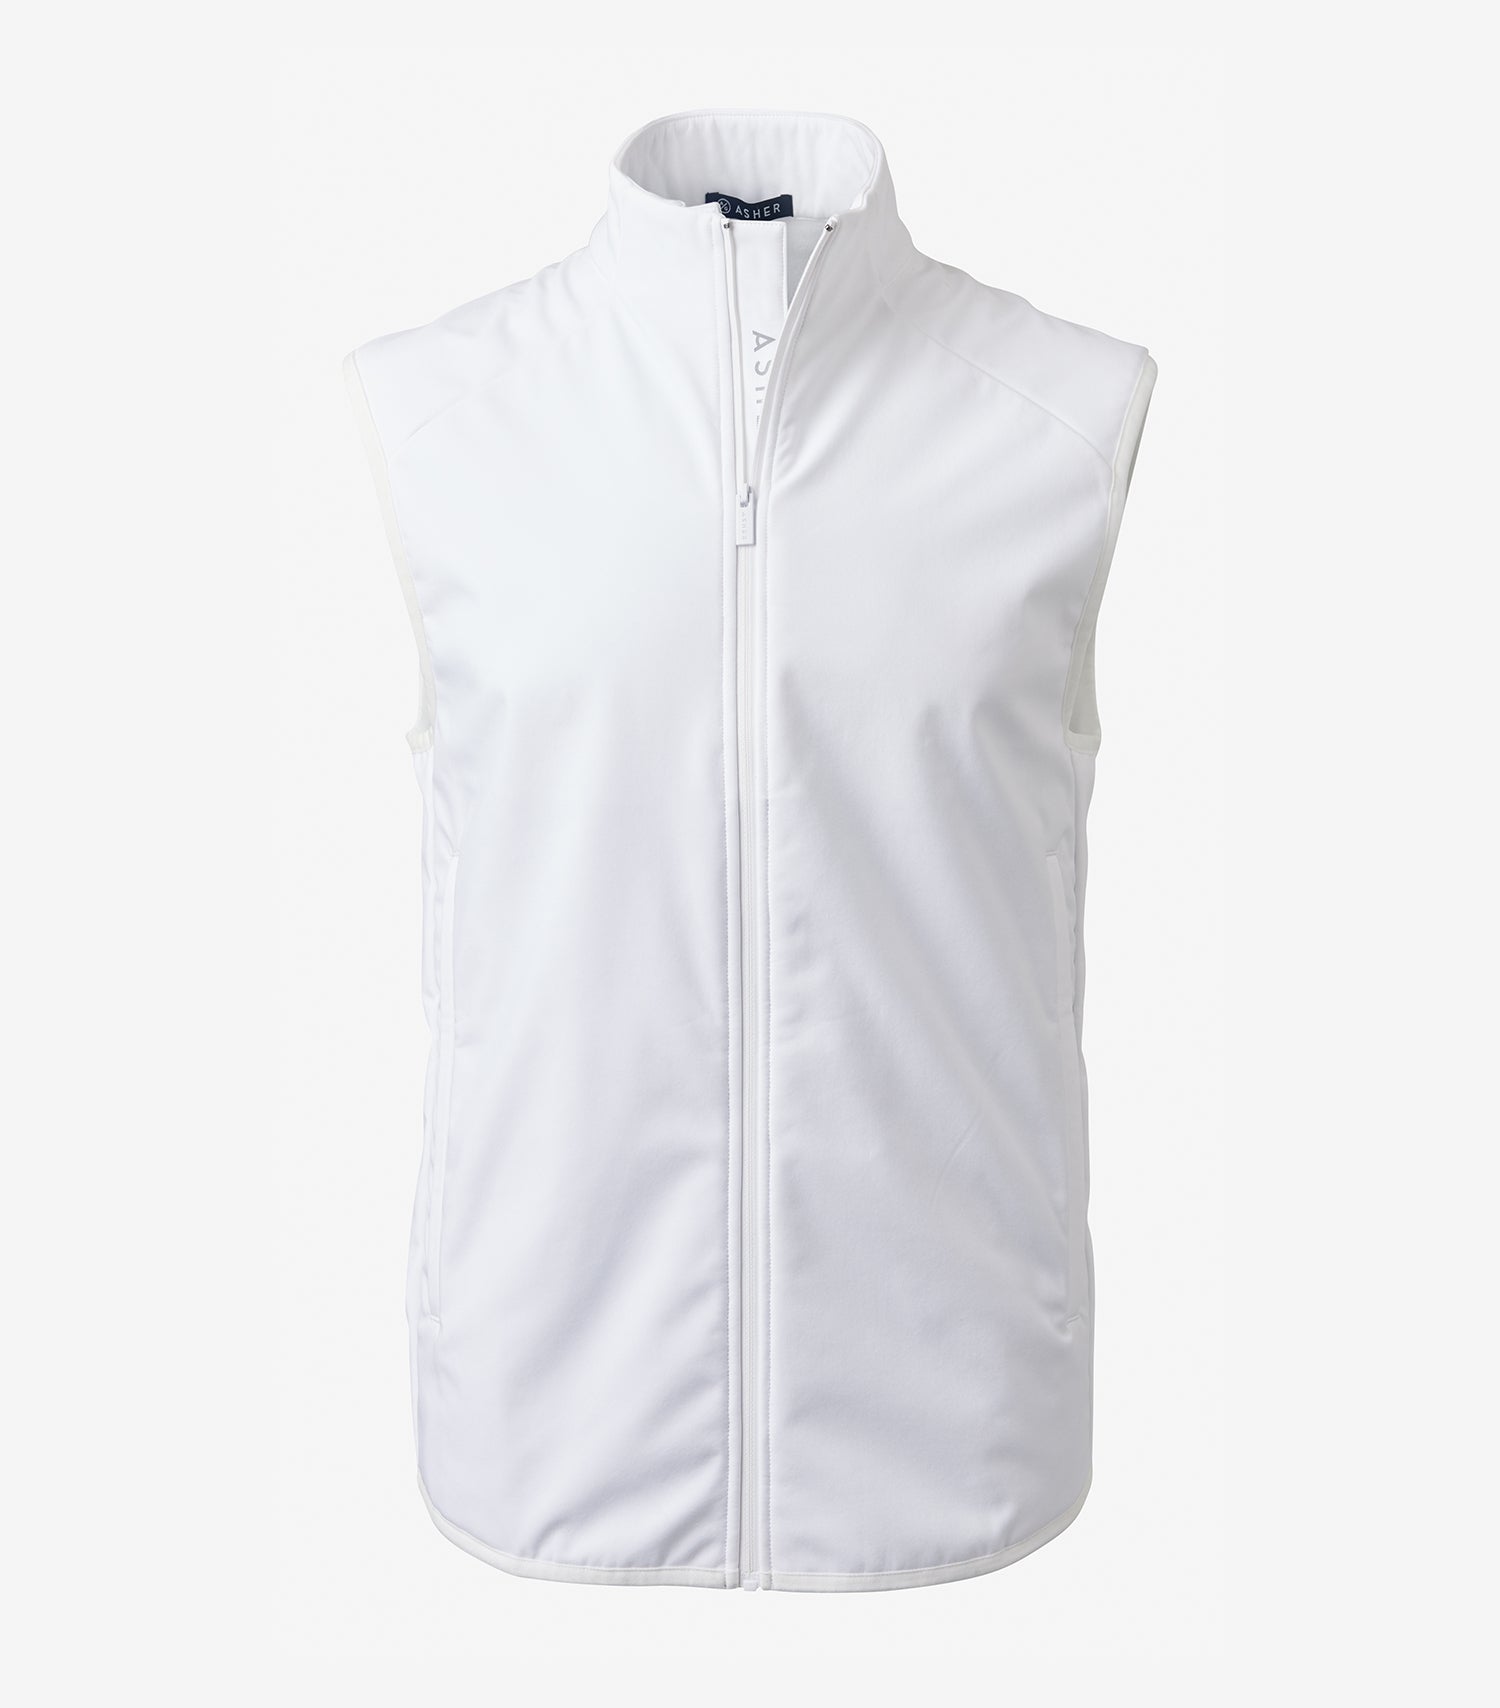 Performance Blend Lined Full-Zip Wind Vest - Greg Norman Collection